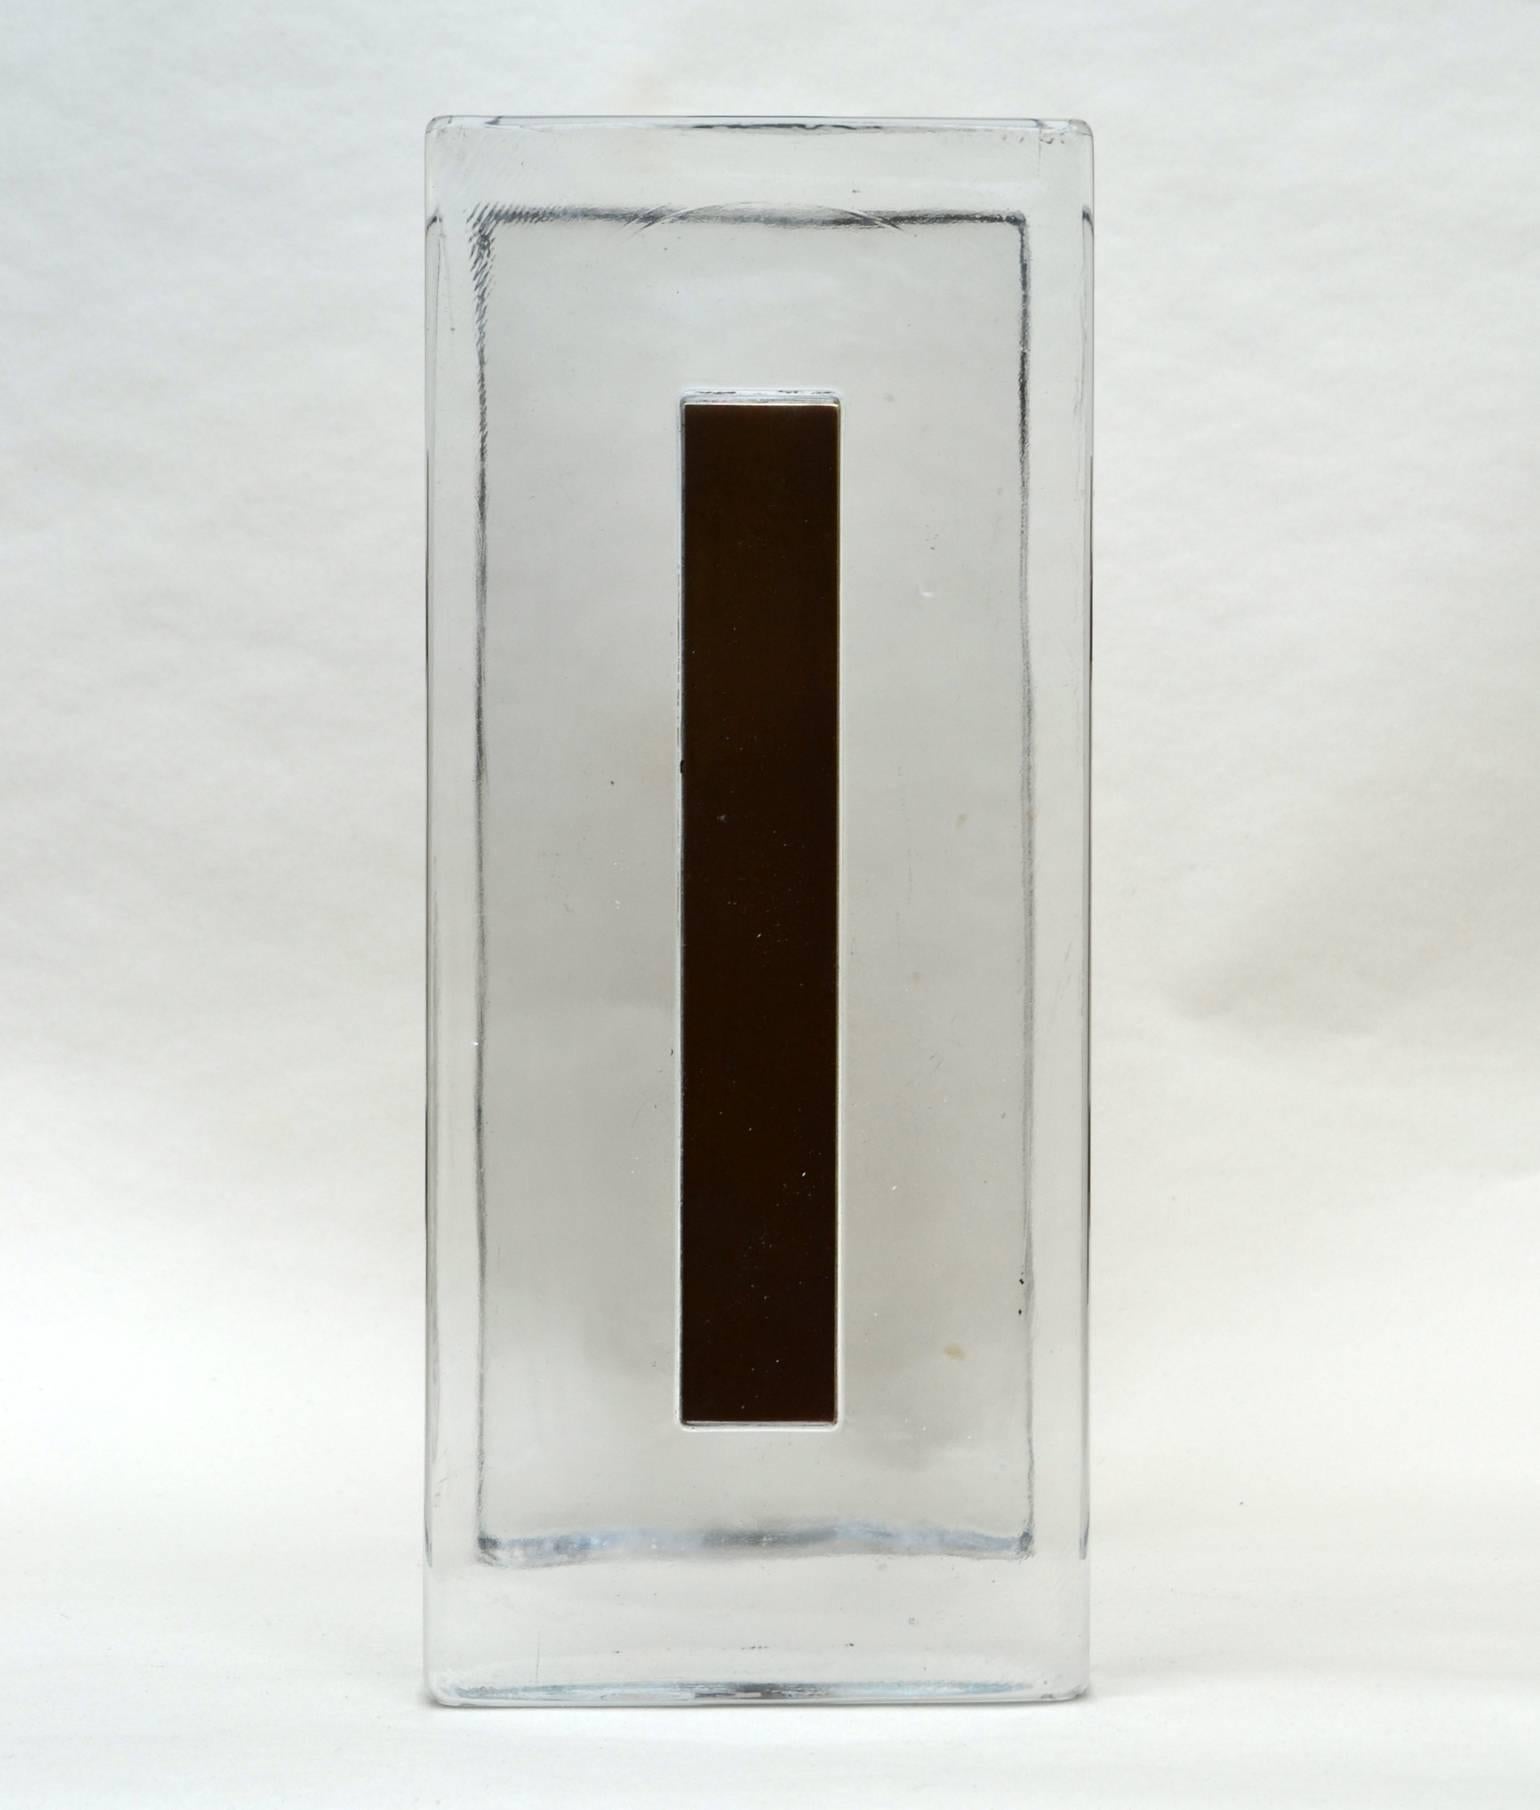 Clear glass cast push and pull door handle with brass plate and fittings, designed for a glass door. They are made in solid glass, 3cm thick. The brass plates are oxidized through age but can also be repolished on request.

A selection single door